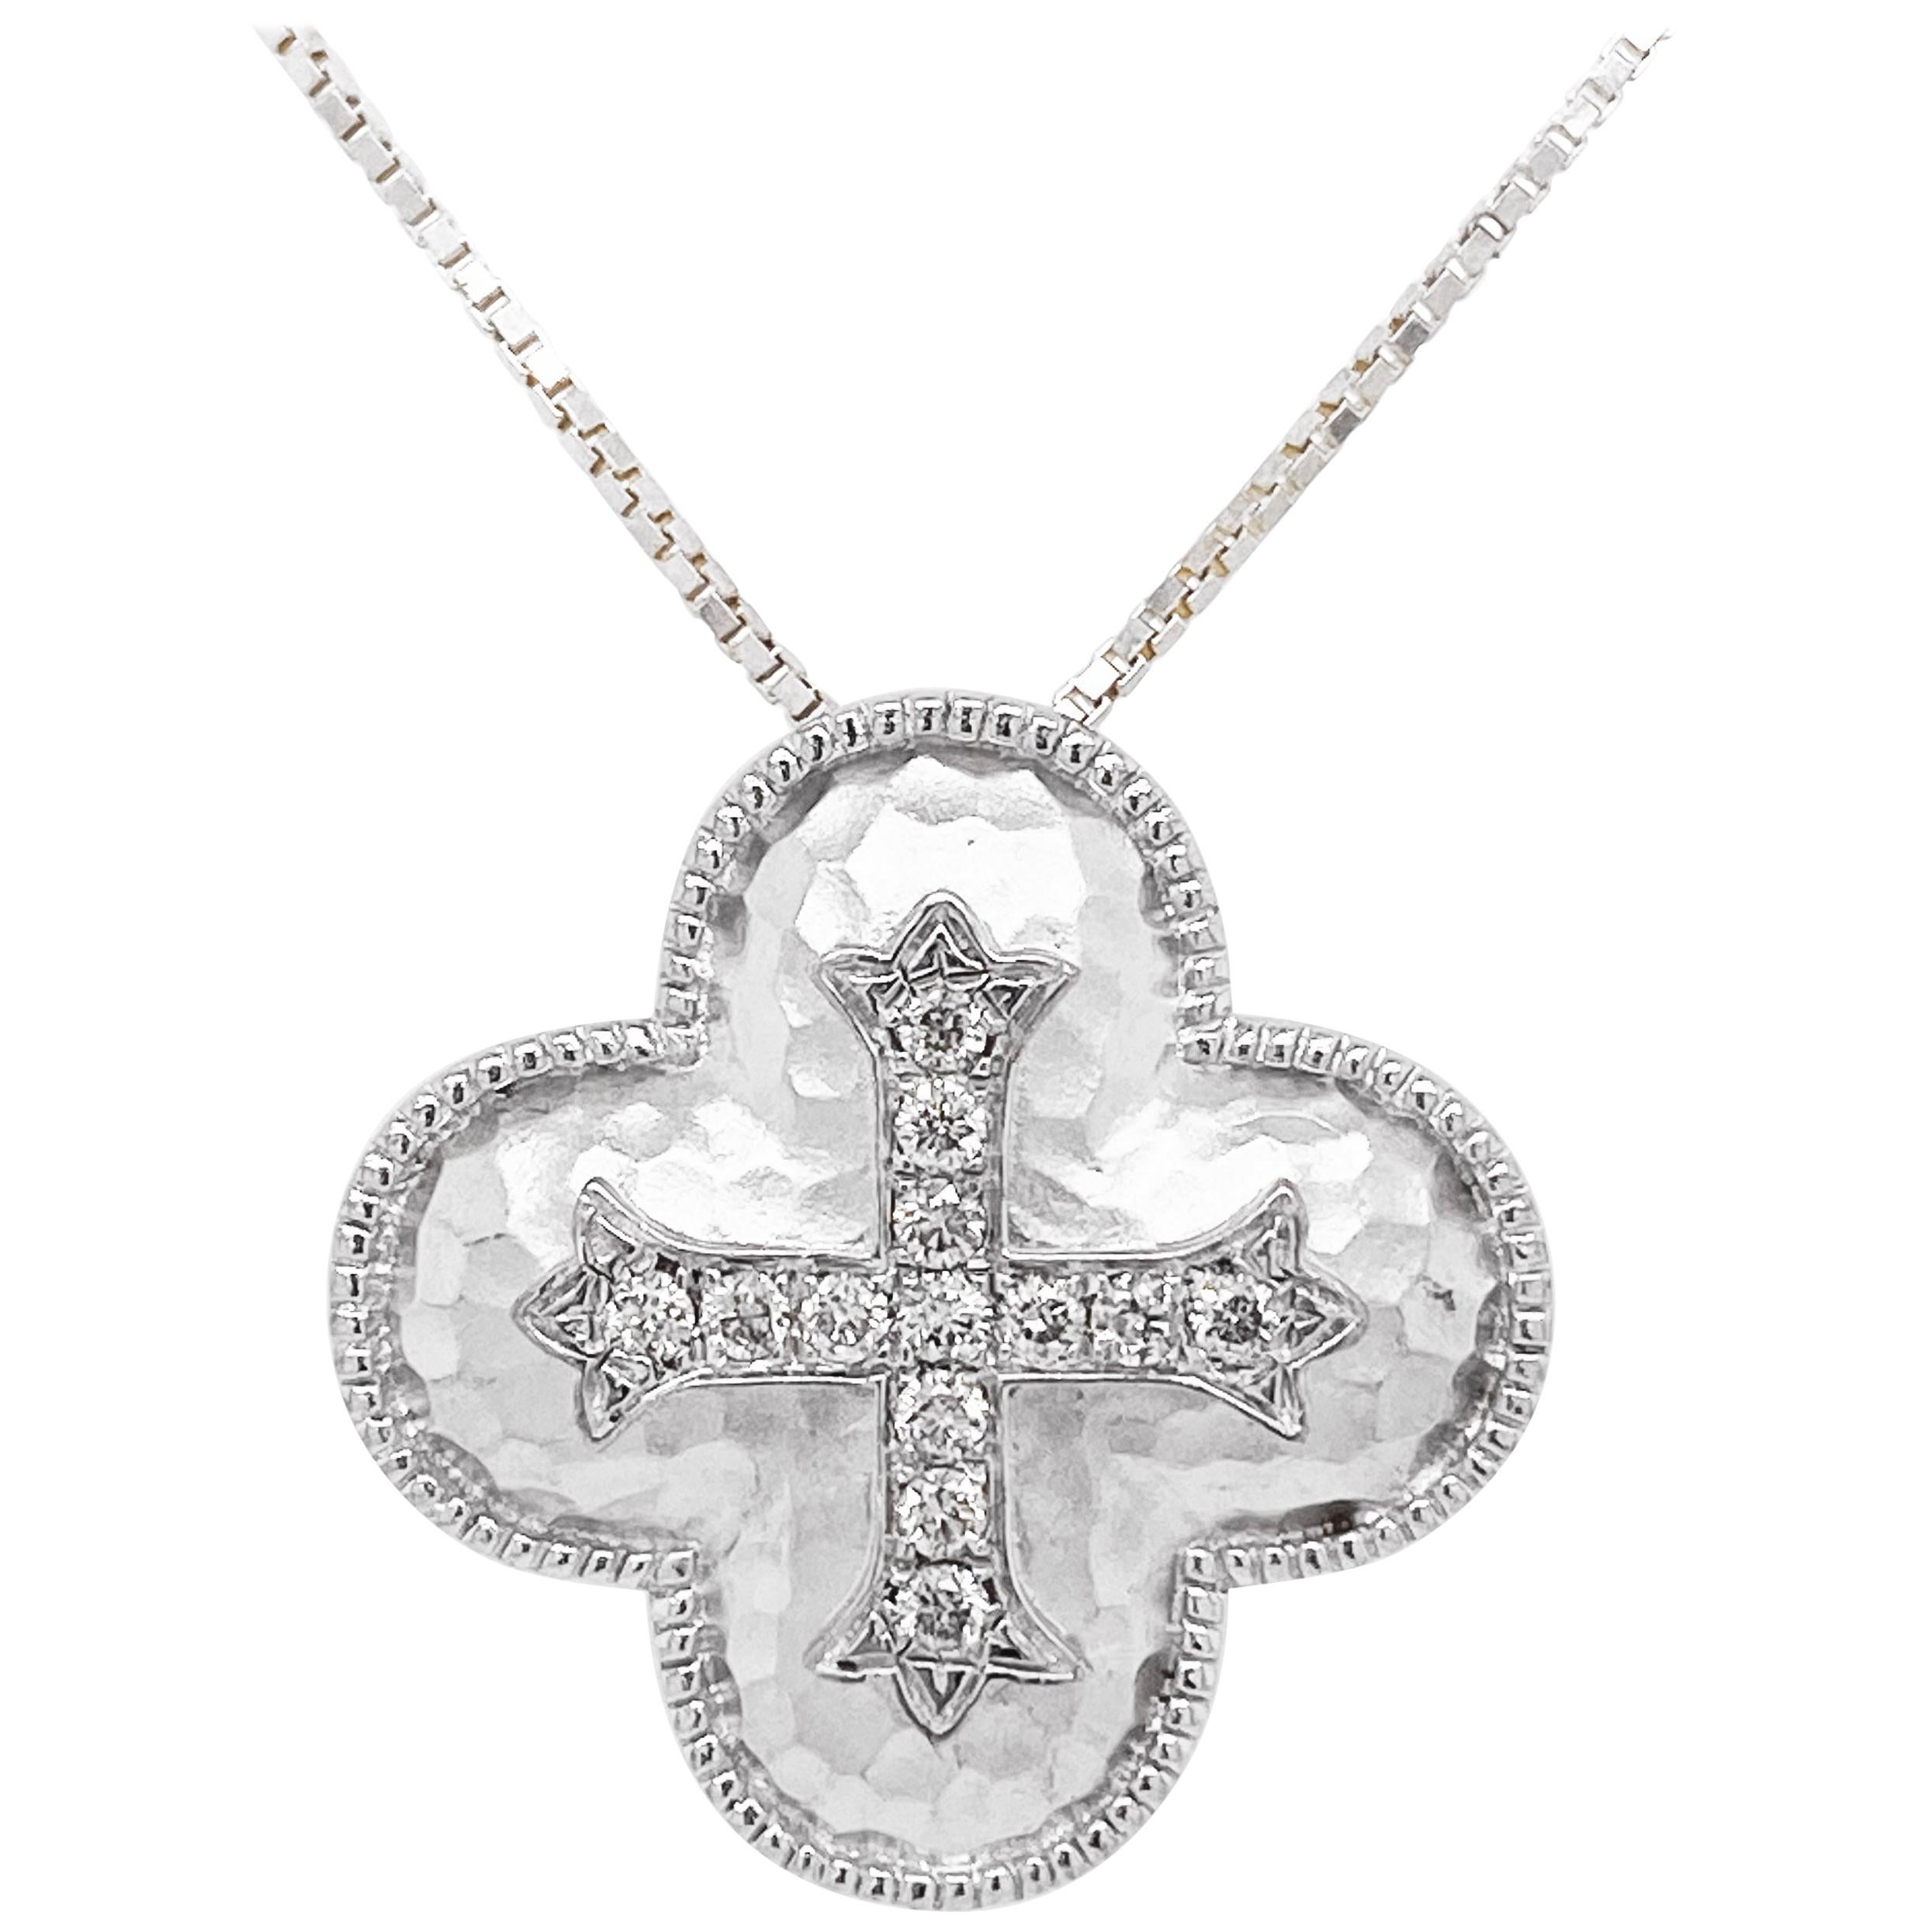 Diamond Cross Necklace with Hammering, Diamond Cross Pendant and Chain, Sterling